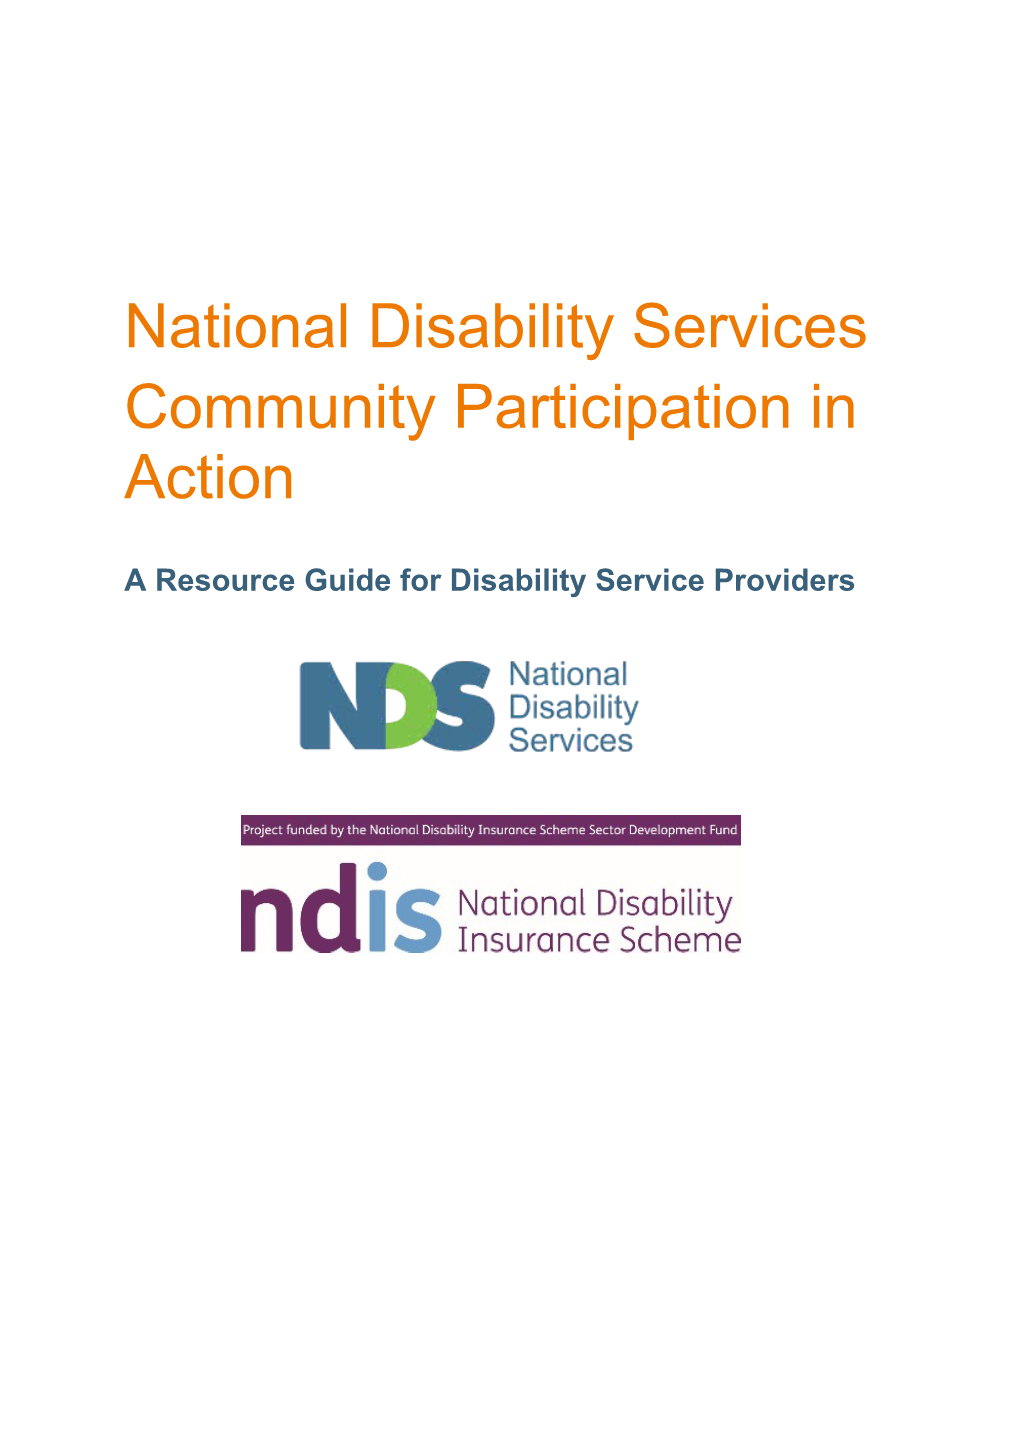 A Resource Guide for Disability Service Providers